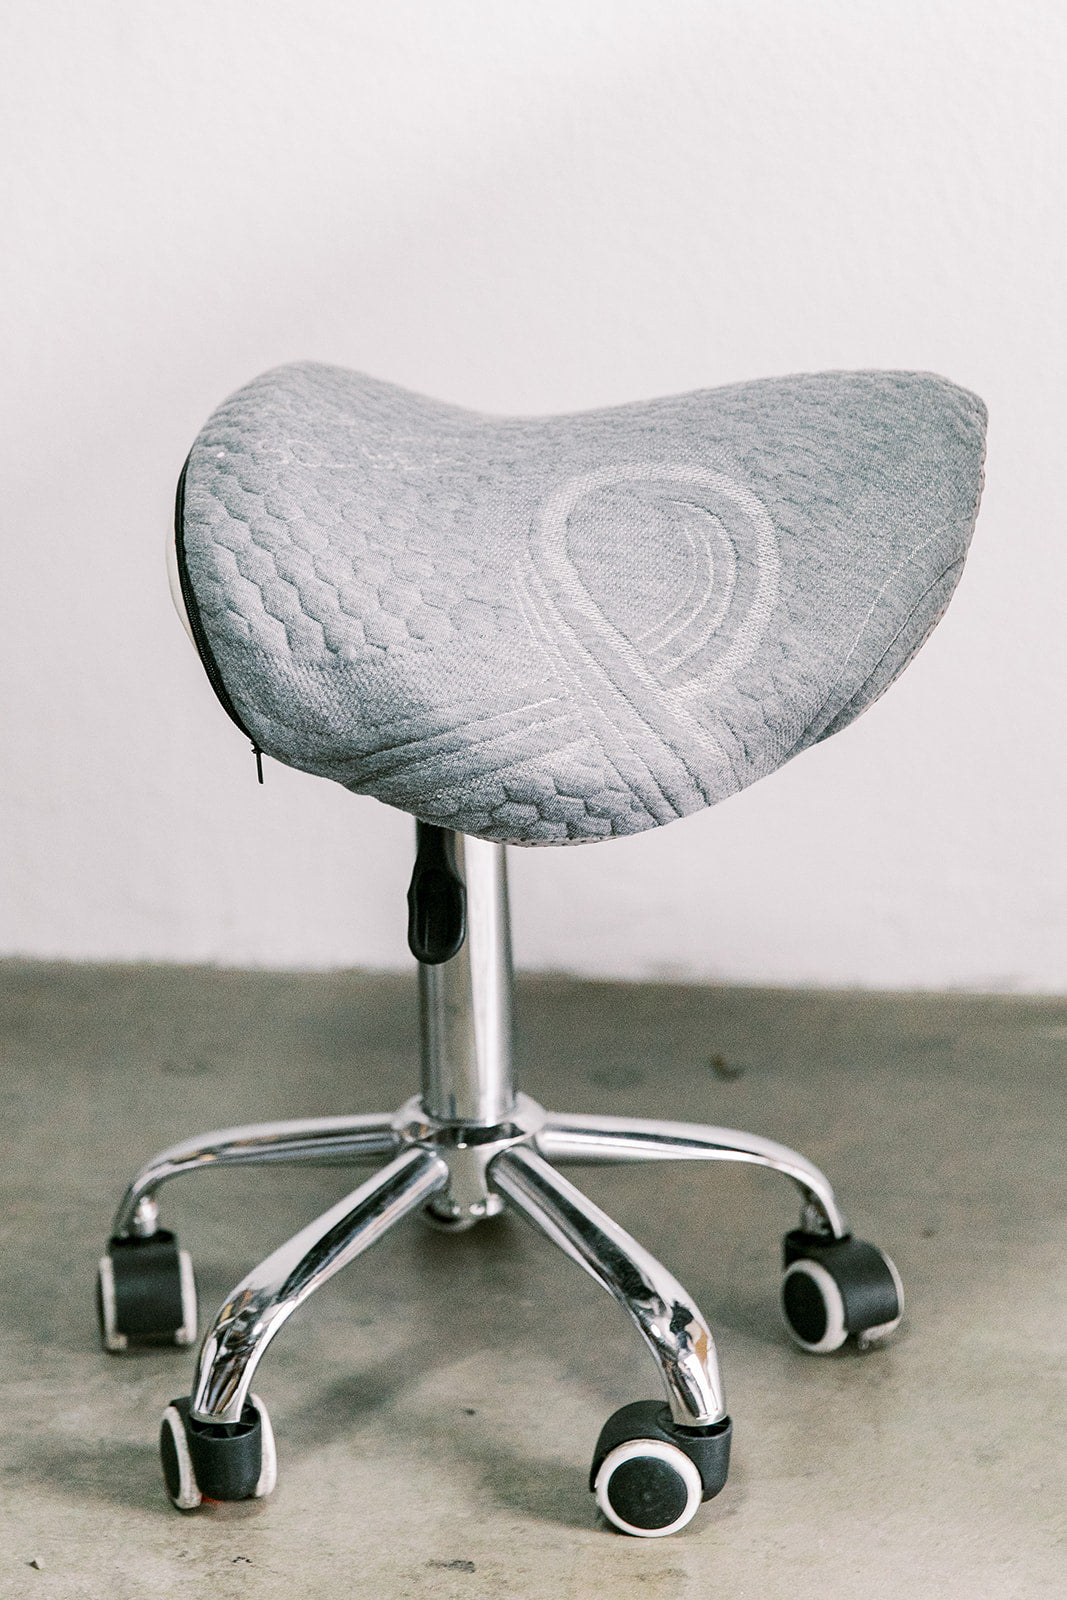 Foam Seat Cushion Comfortable Butt Pad for Office Chair Wheel